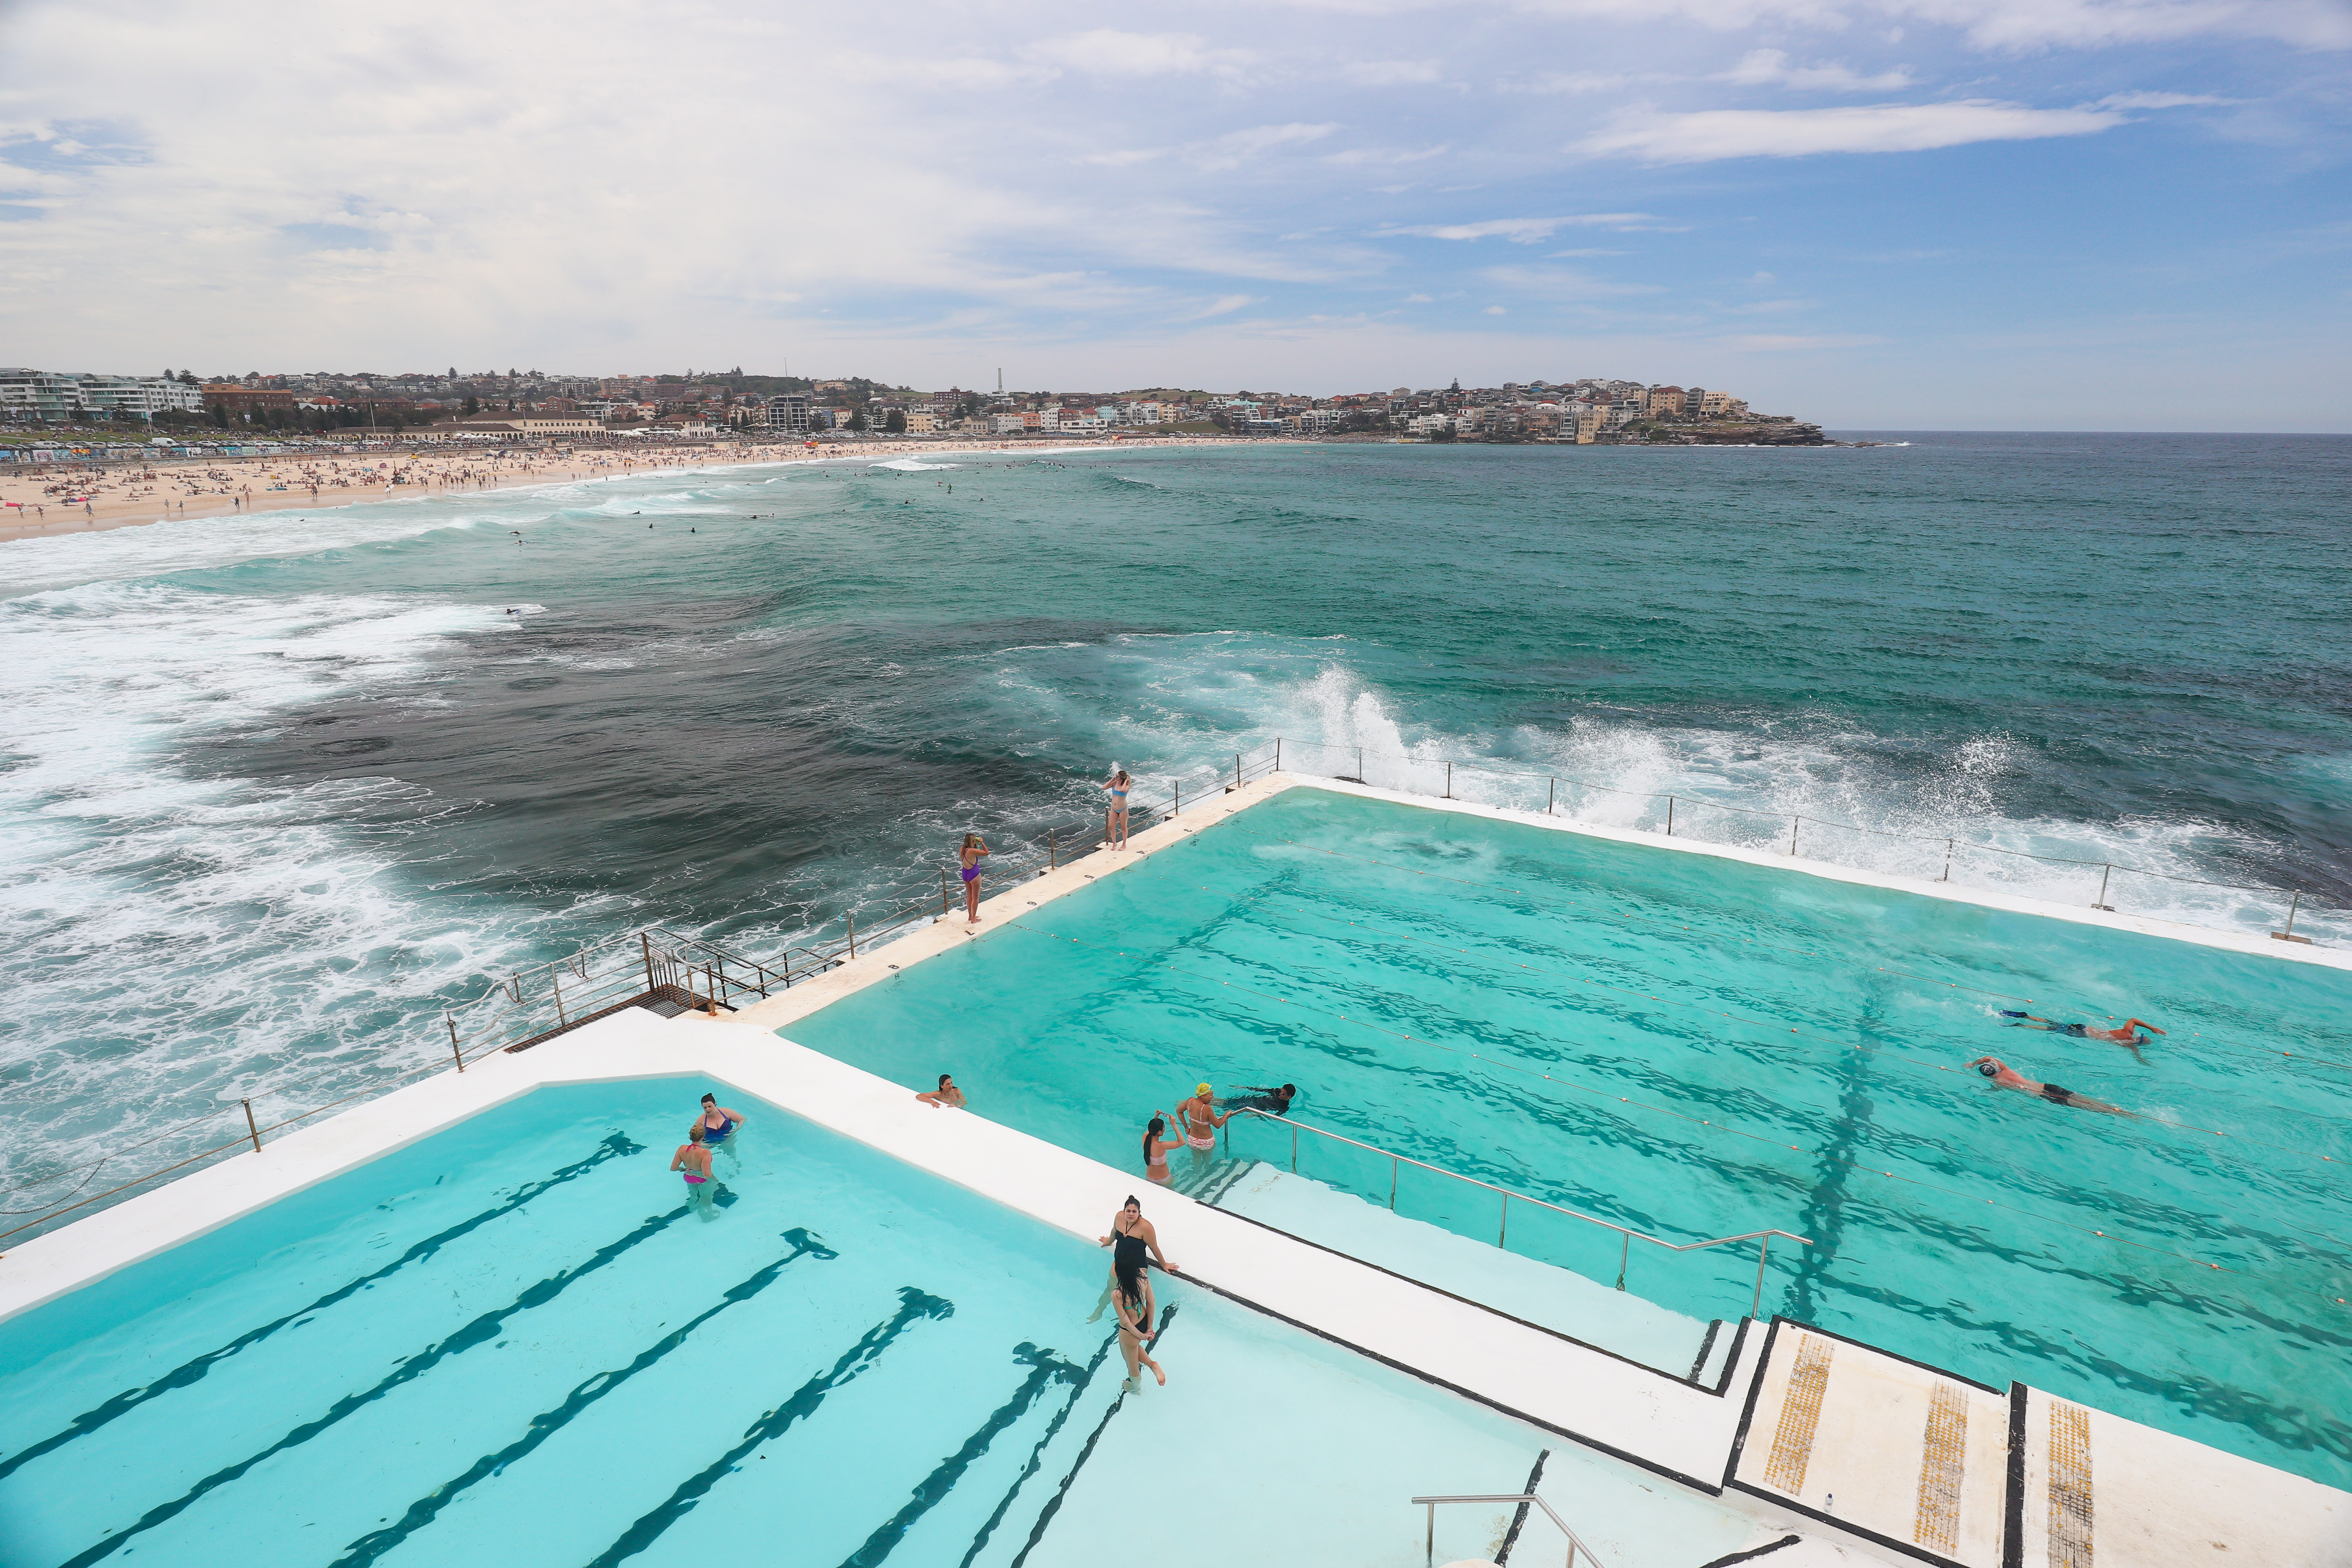 Where to find the Best Views in Sydney